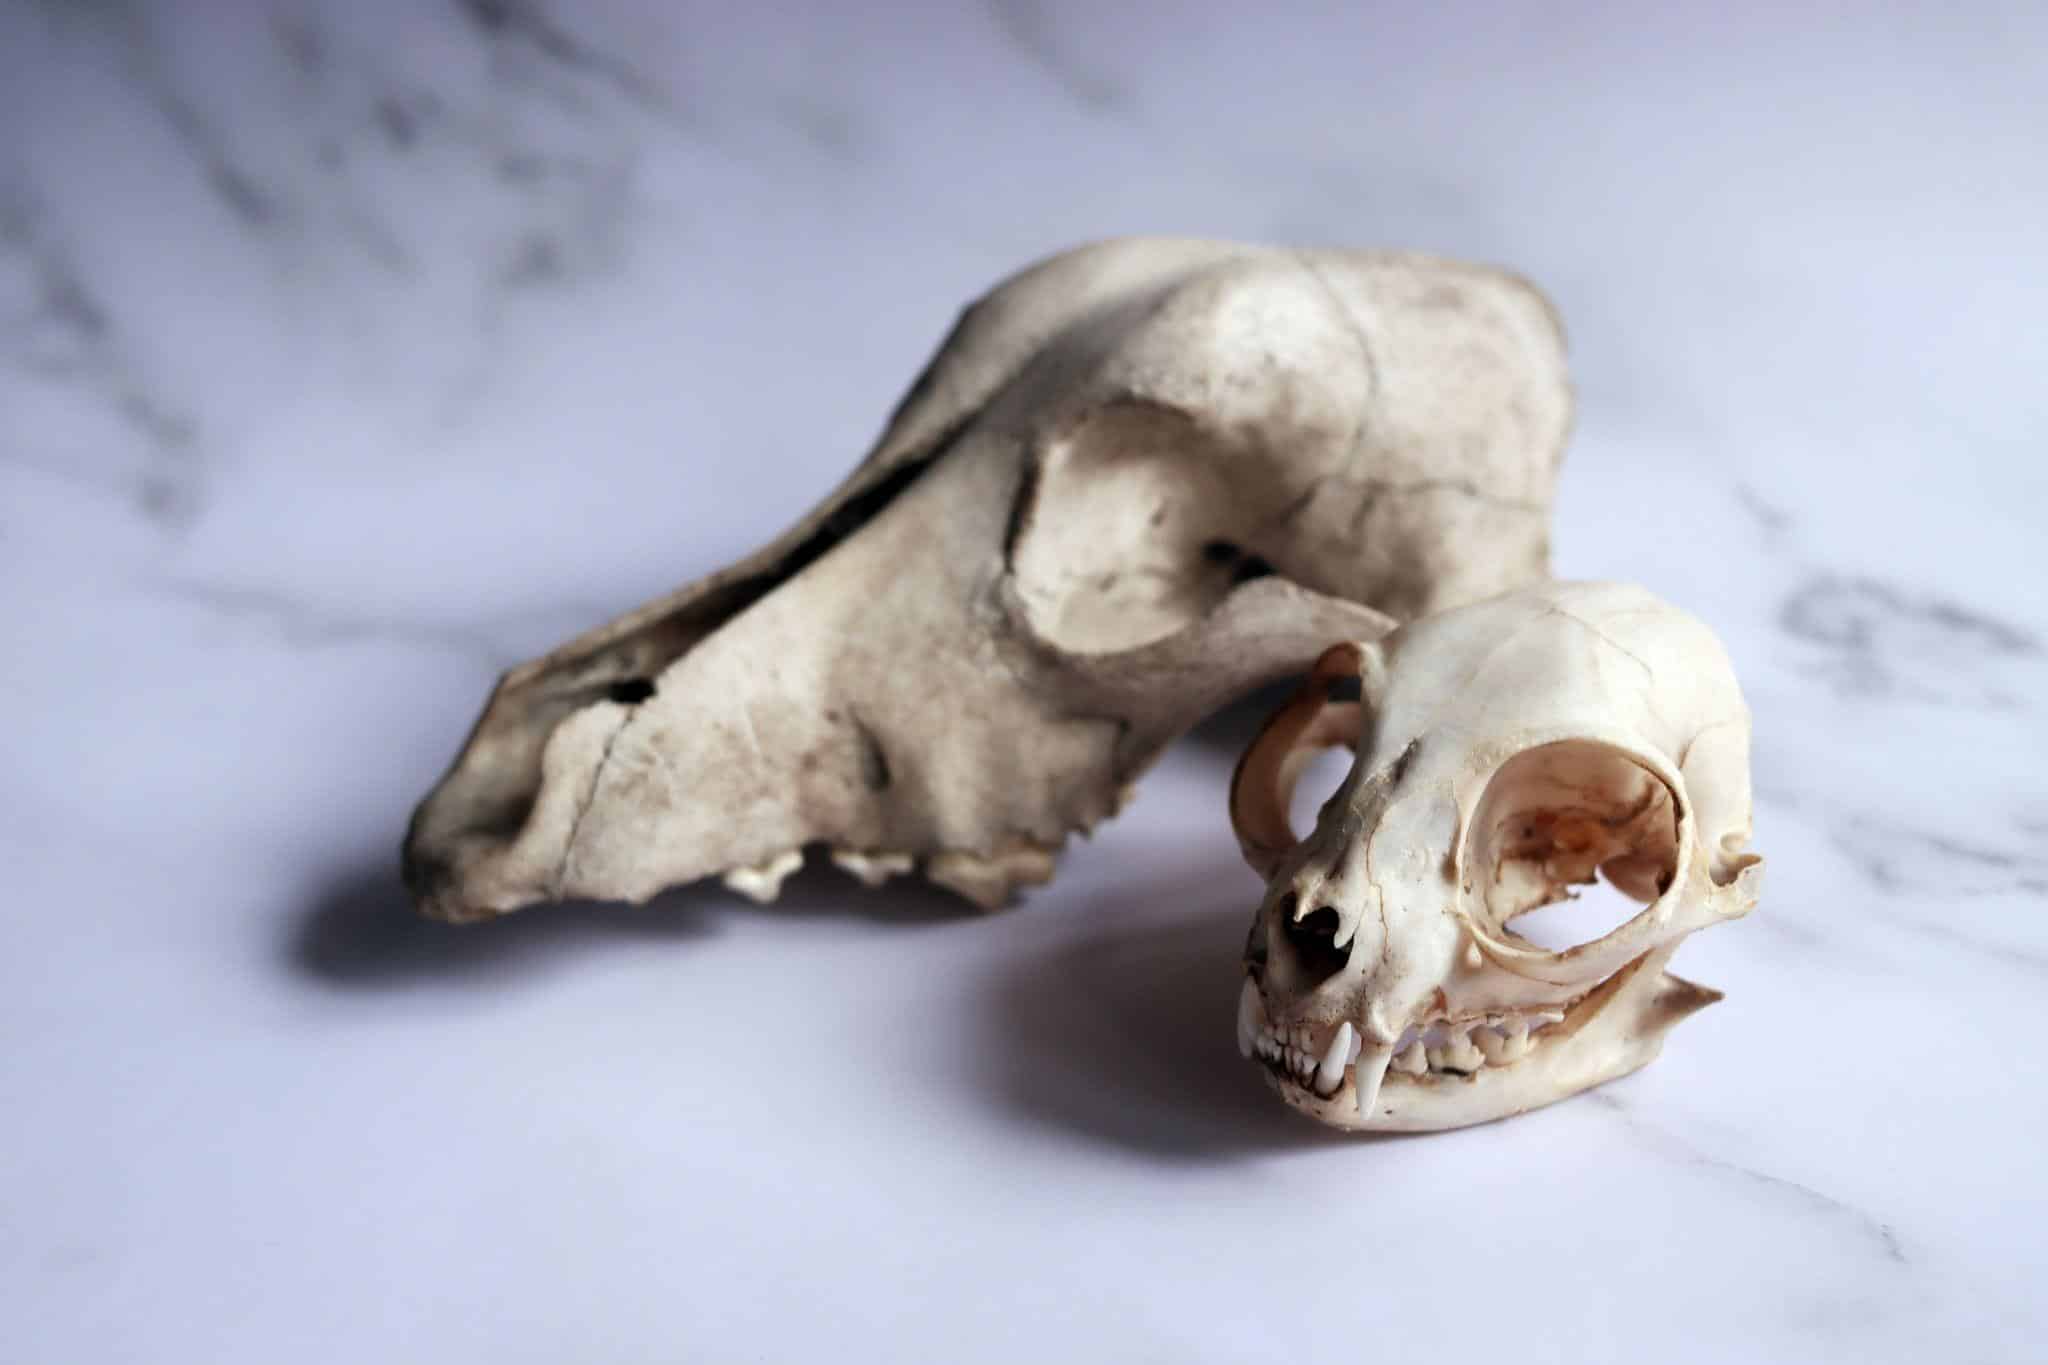 Feline skull in the foreground, in the background out of focus dog skull